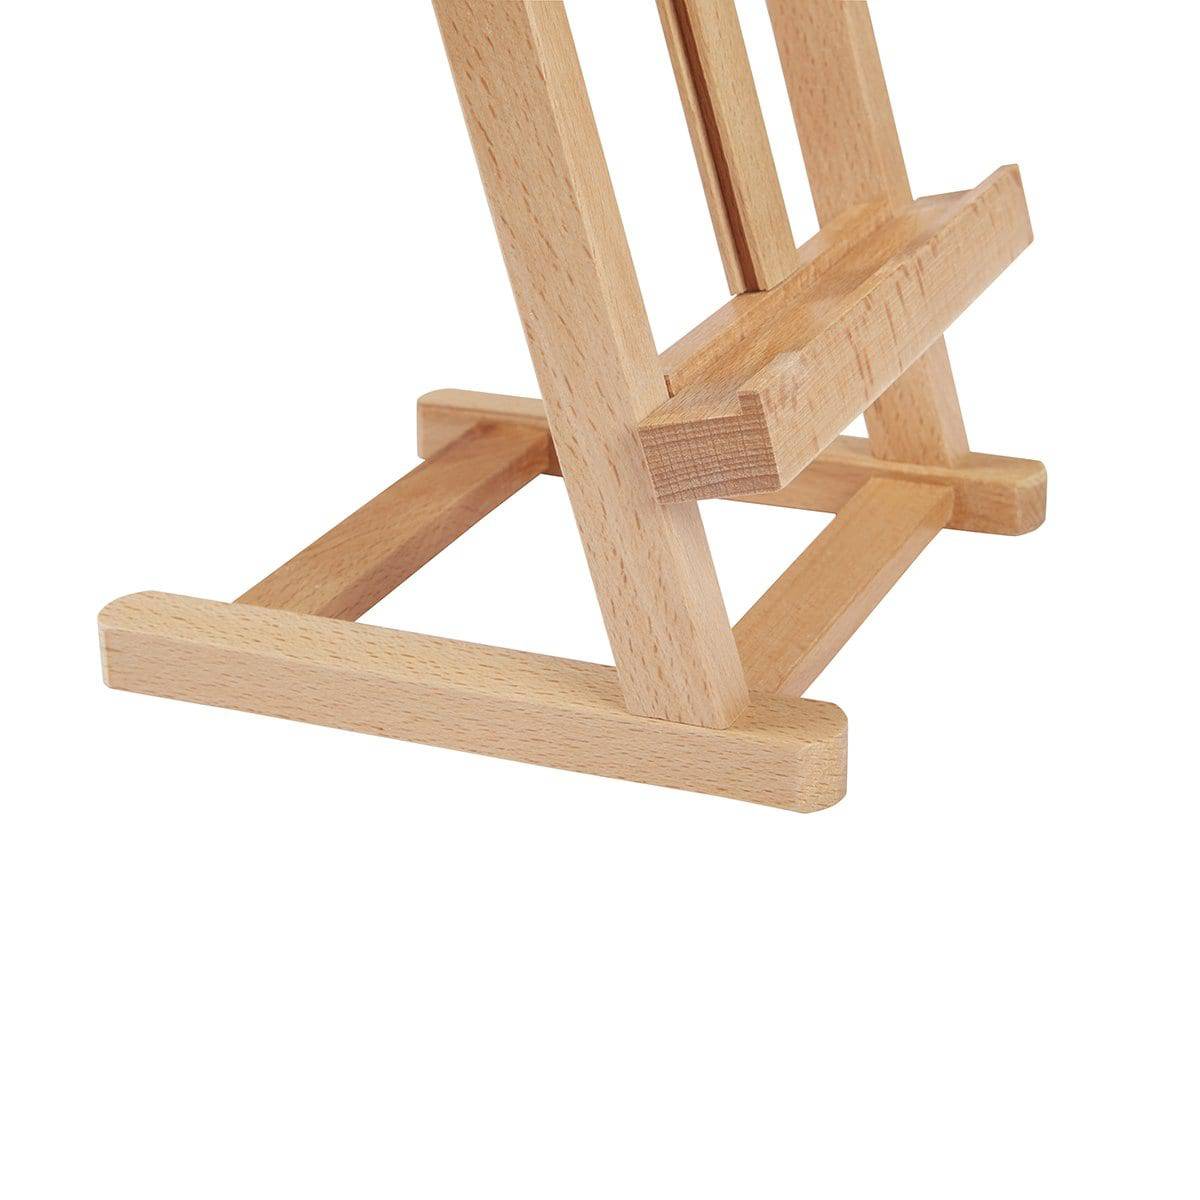 5 Mini Wood Display Easel (12 Pack), A-Frame Artist Tripod Easel - Tabletop  Holder Stand, 5” - 12 Pack - King Soopers